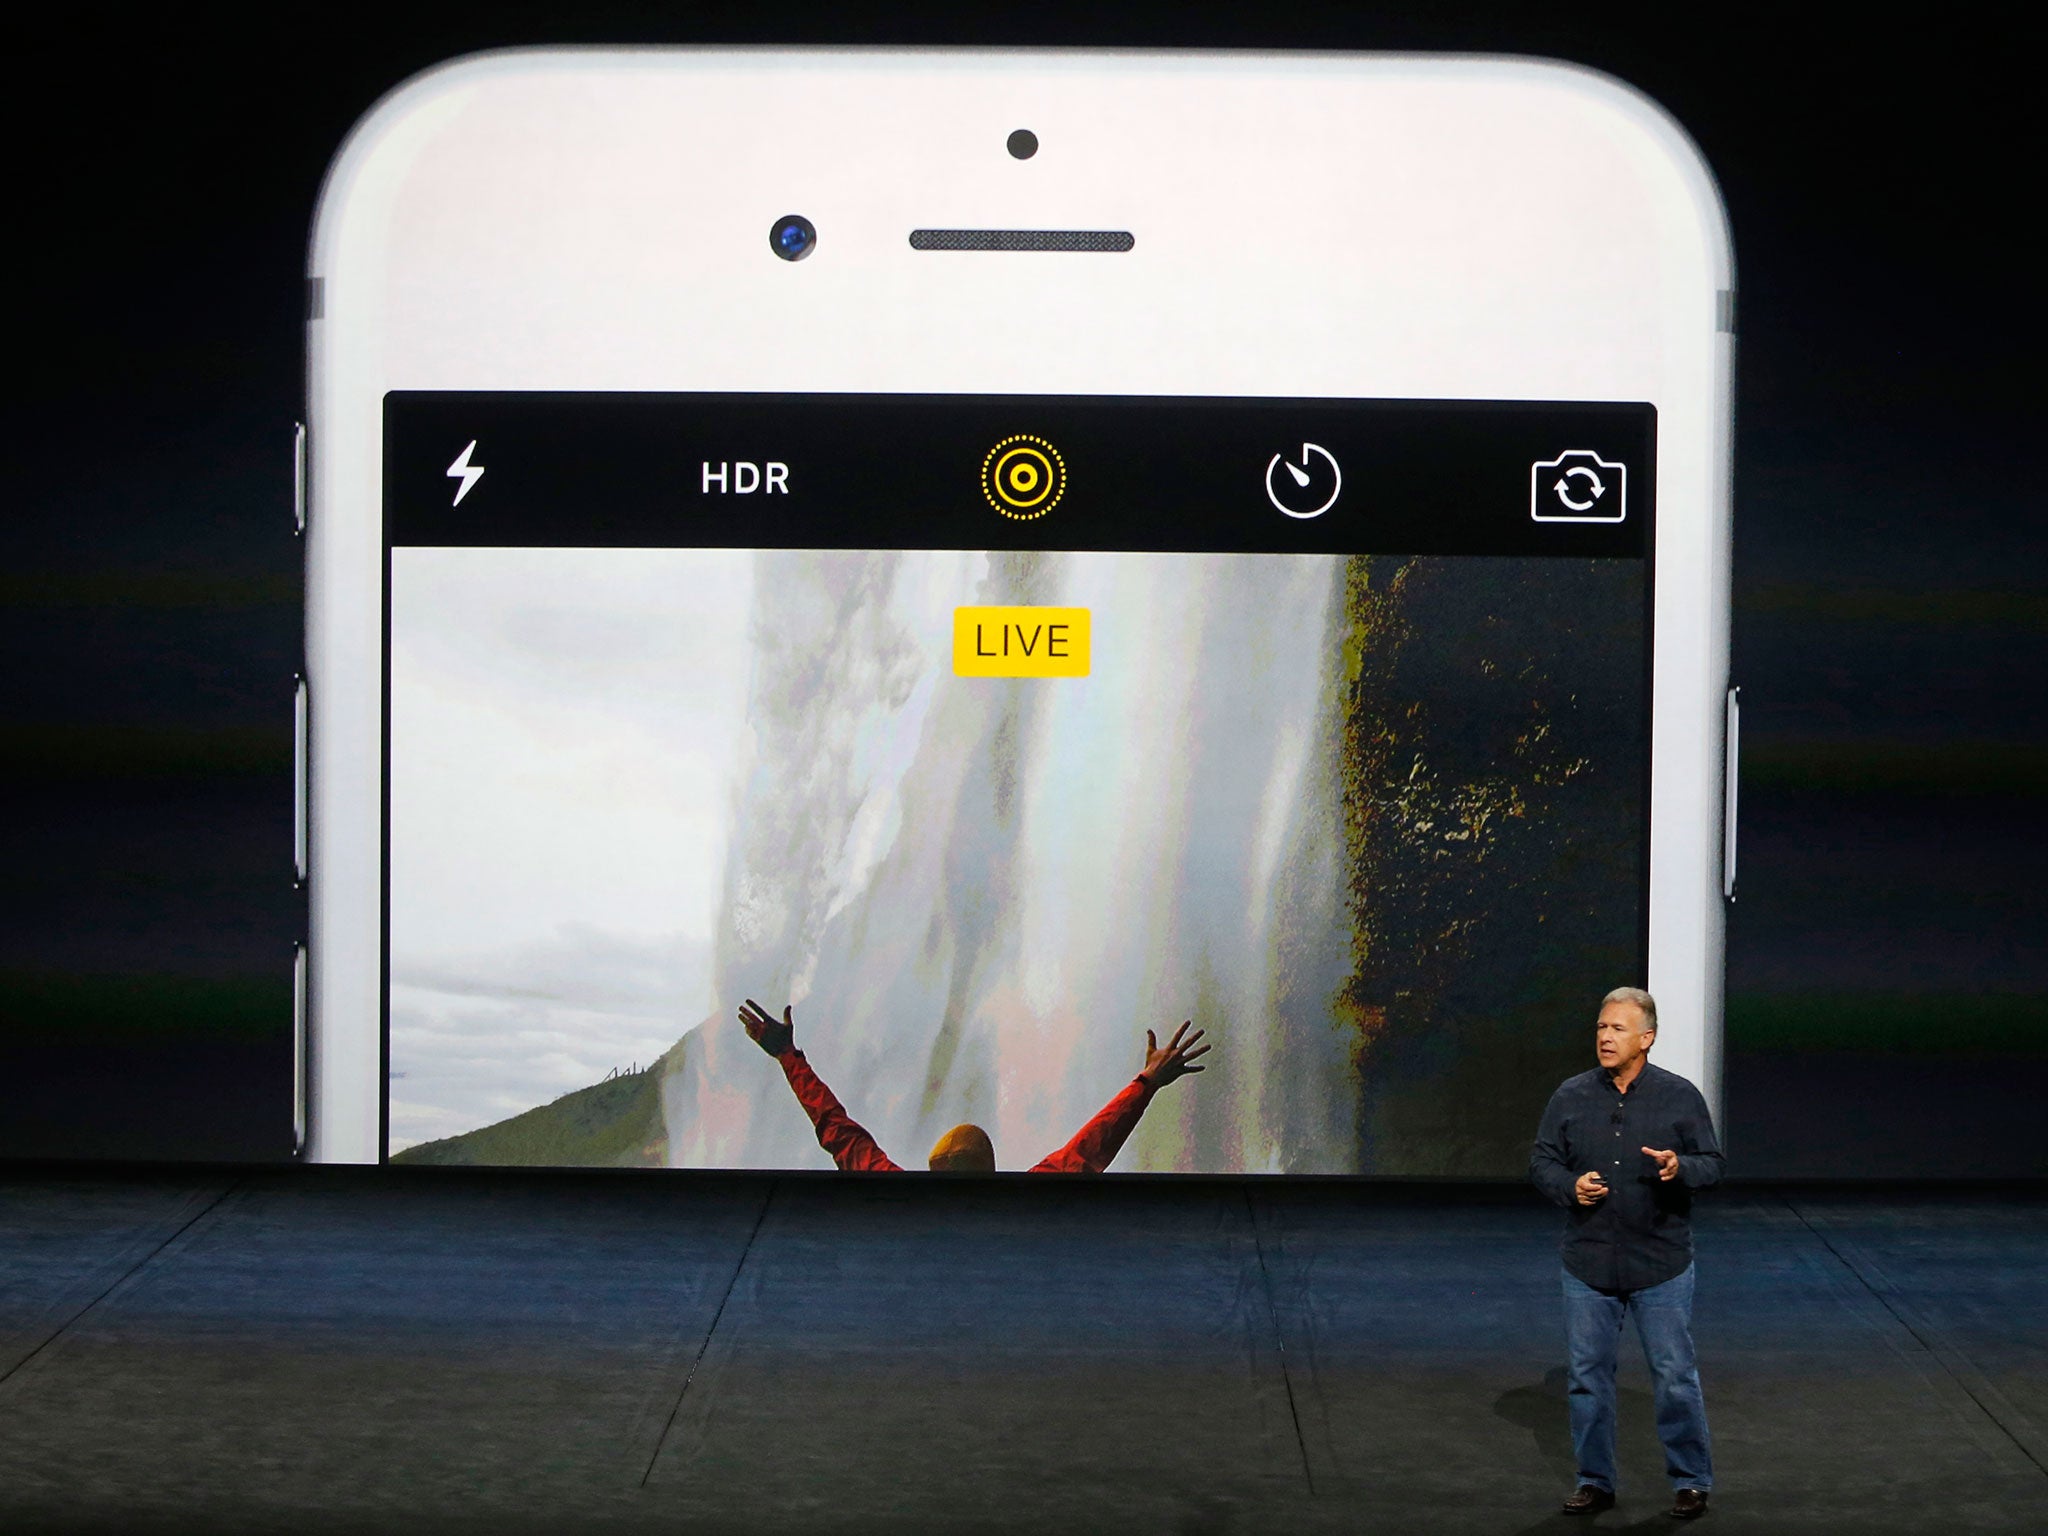 Phil Schiller, Senior Vice President of Worldwide Marketing at Apple Inc, speaking about the live photo capability for new iPhone 6 in September